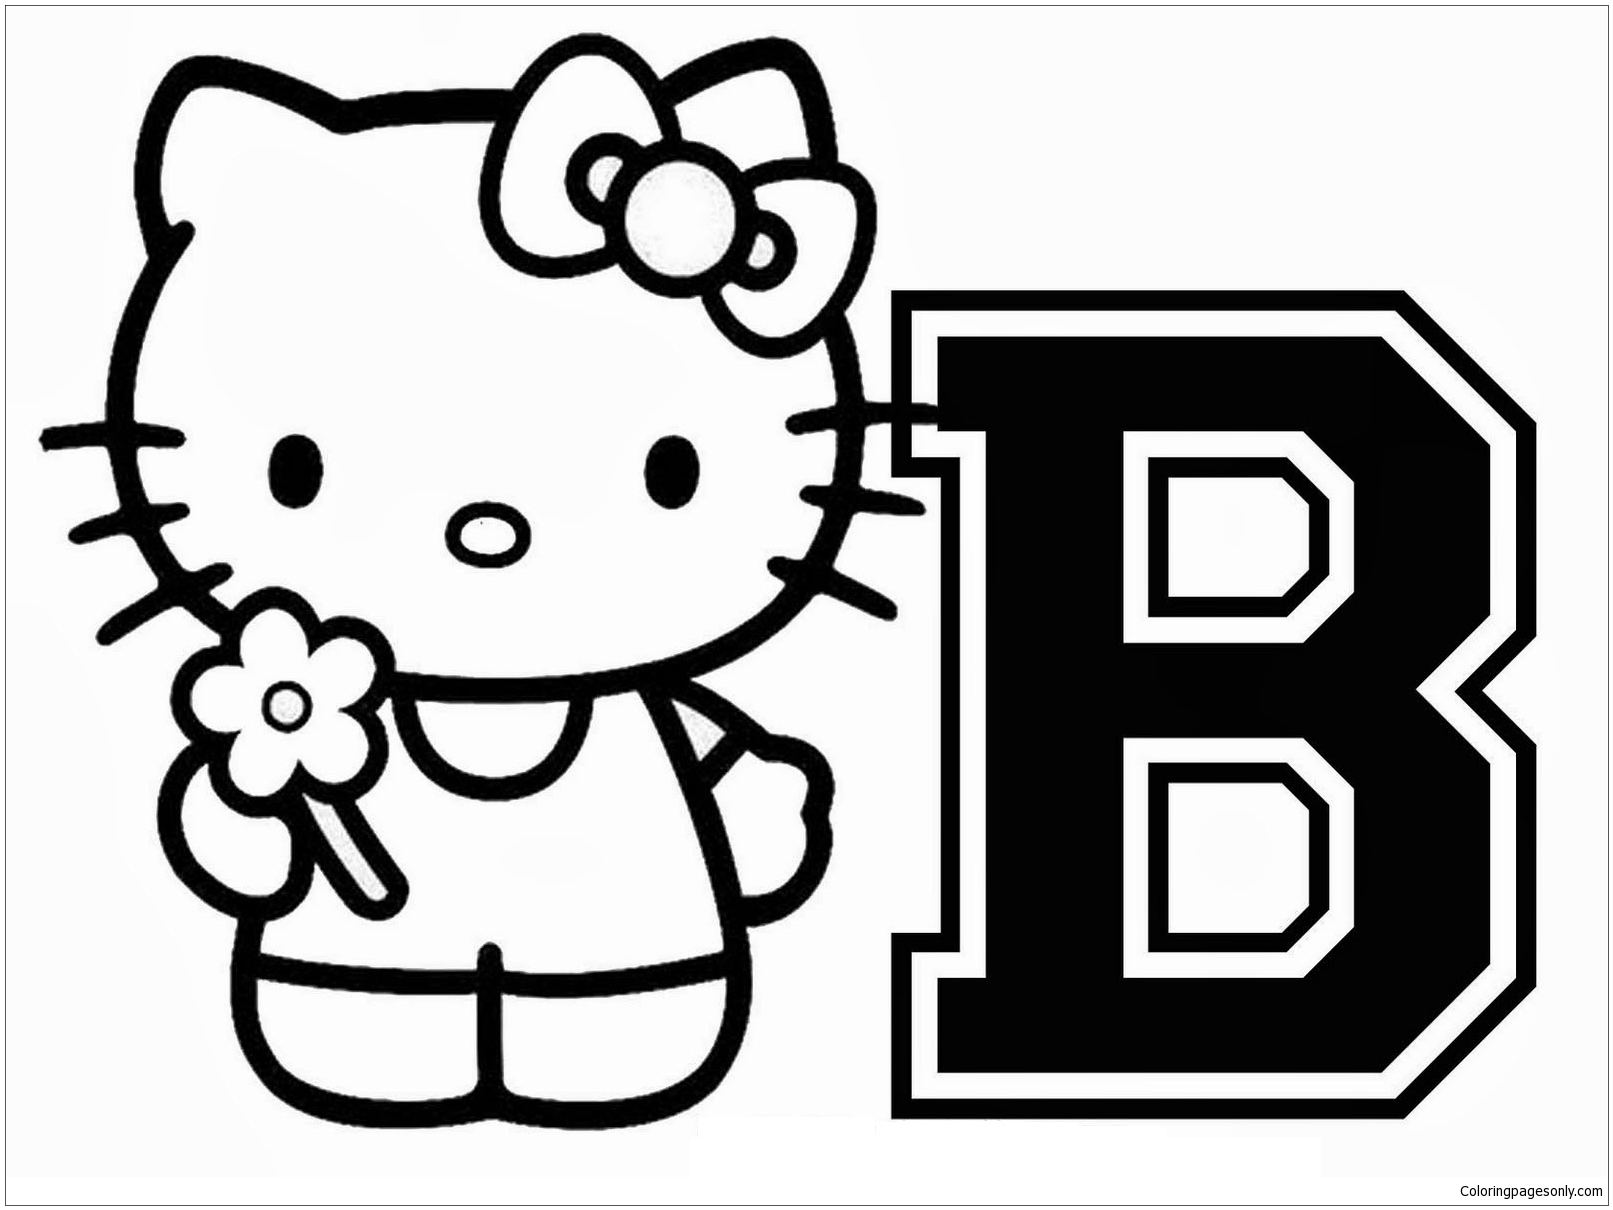 Hello Kitty With The Alphabet B Coloring Page - Free Coloring Pages Online